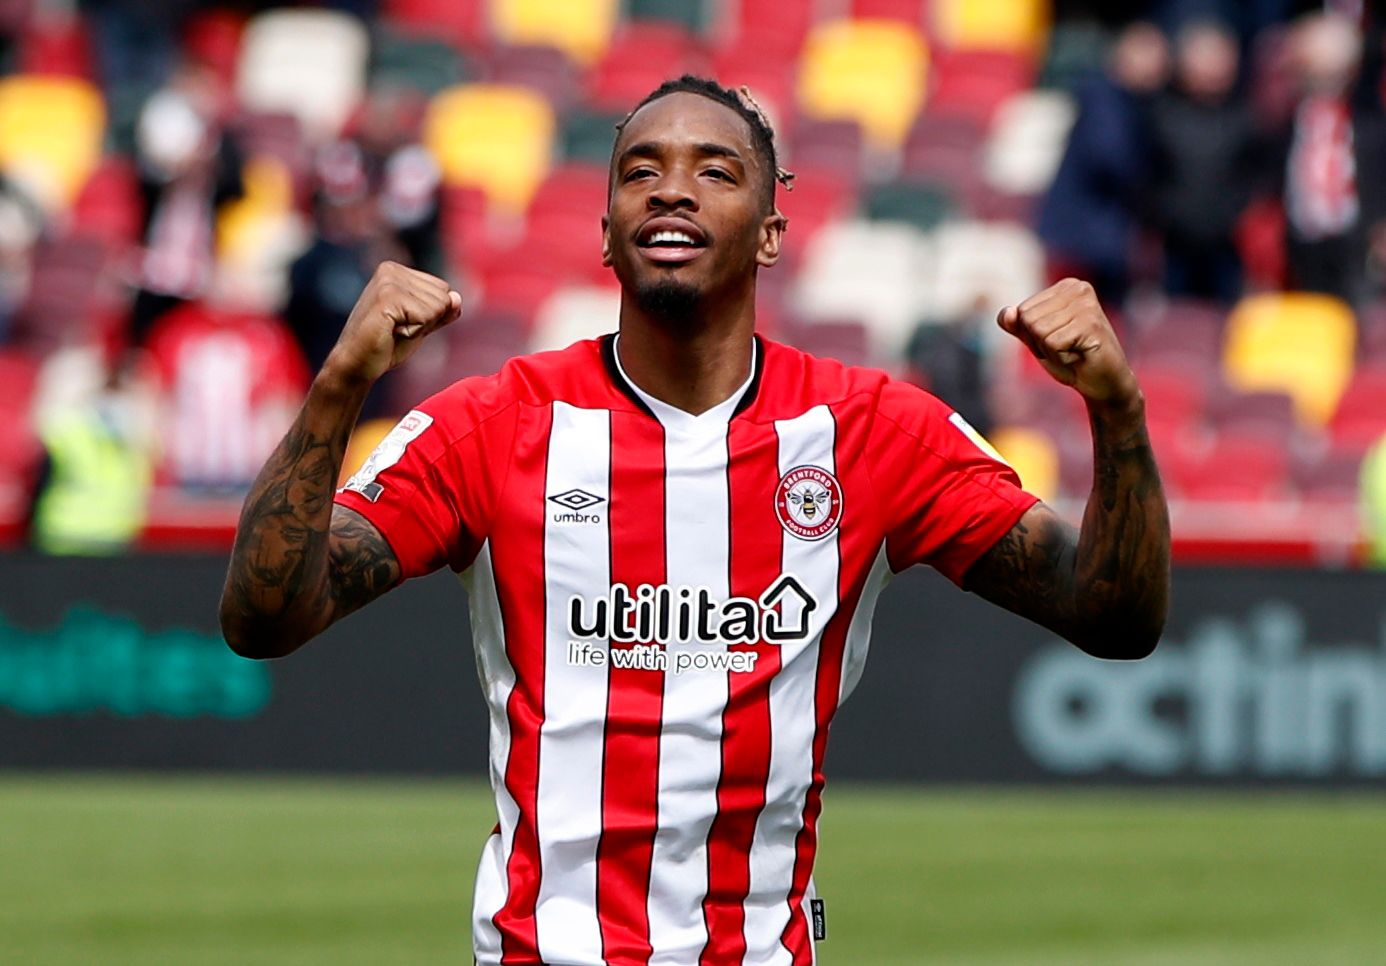 Soccer Football - Championship Play-Off Semi Final Second Leg - Brentford v AFC Bournemouth - Brentford Community Stadium, London, Britain - May 22, 2021 Brentford's Ivan Toney celebrates after the match Action Images via Reuters/Paul Childs EDITORIAL USE ONLY. No use with unauthorized audio, video, data, fixture lists, club/league logos or 'live' services. Online in-match use limited to 75 images, no video emulation. No use in betting, games or single club /league/player publications.  Please c